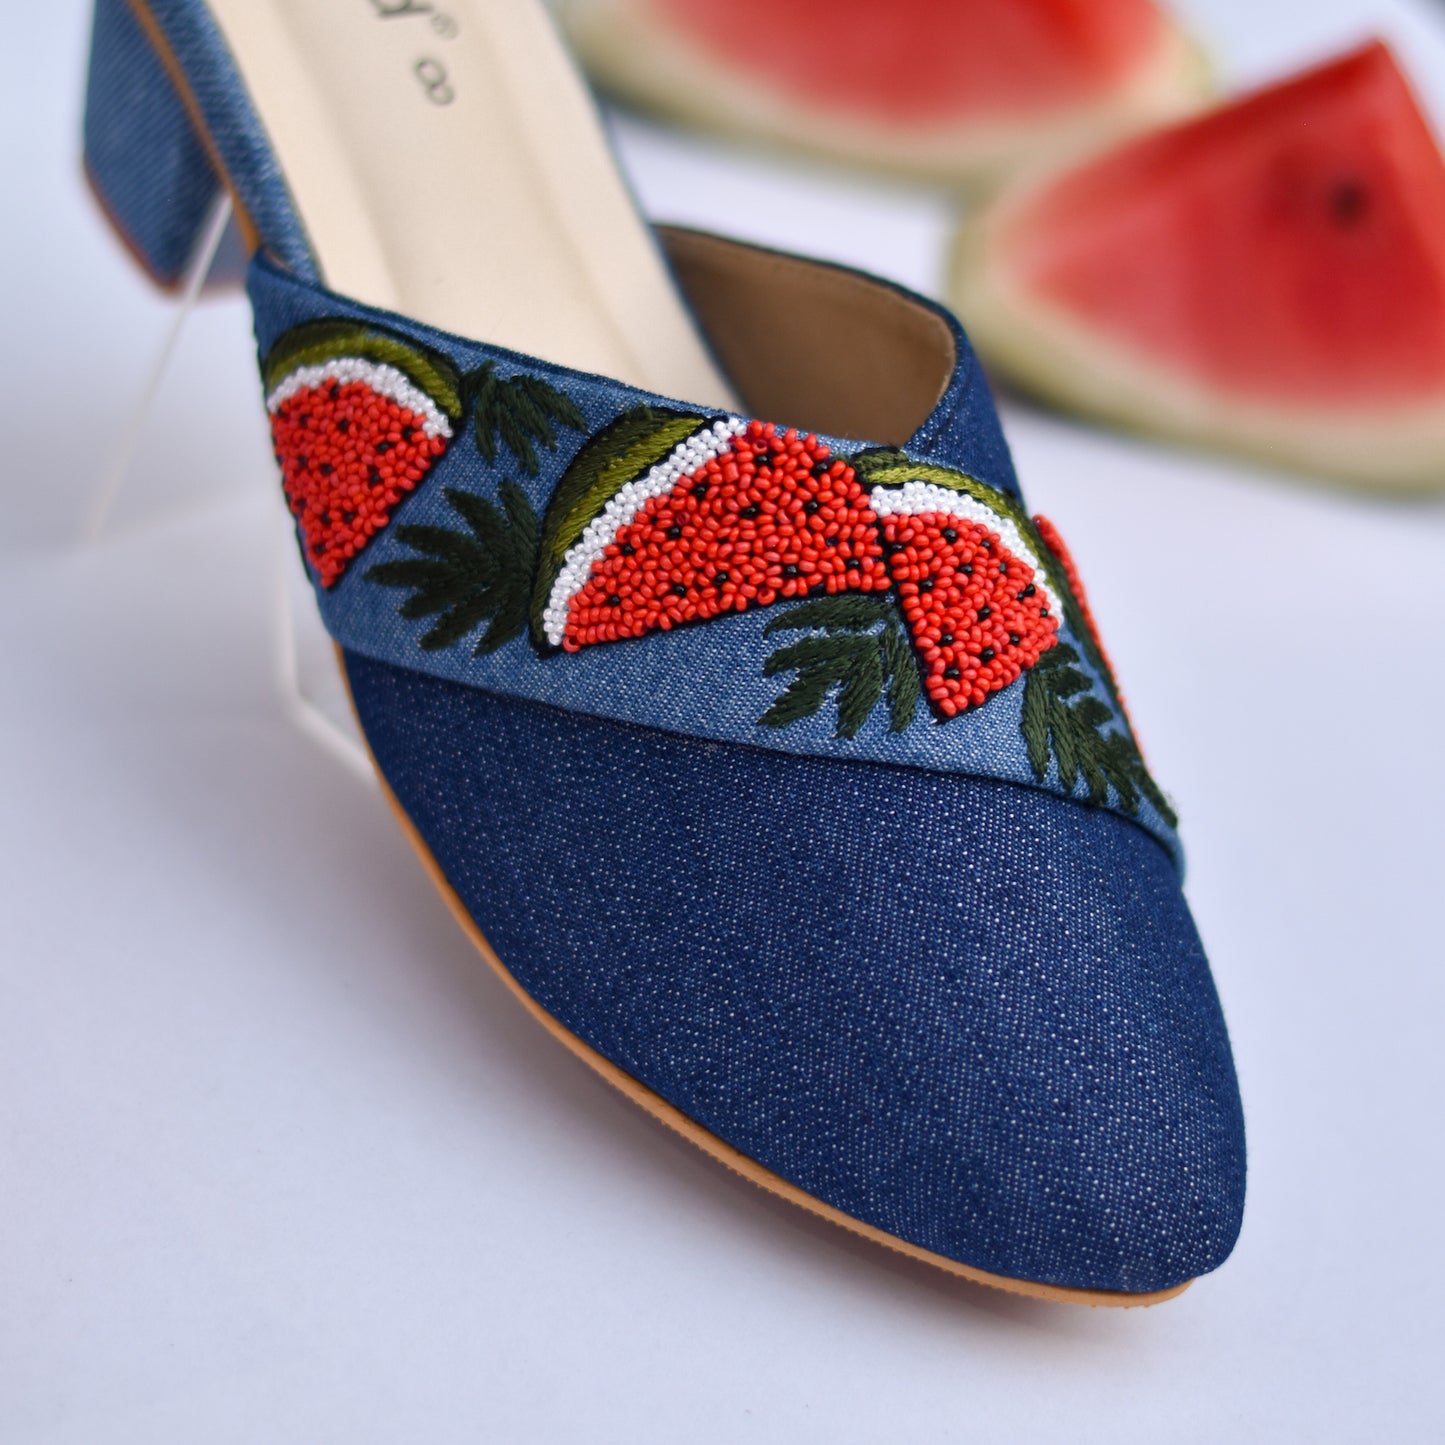 Embroidered casual footwear for classy women